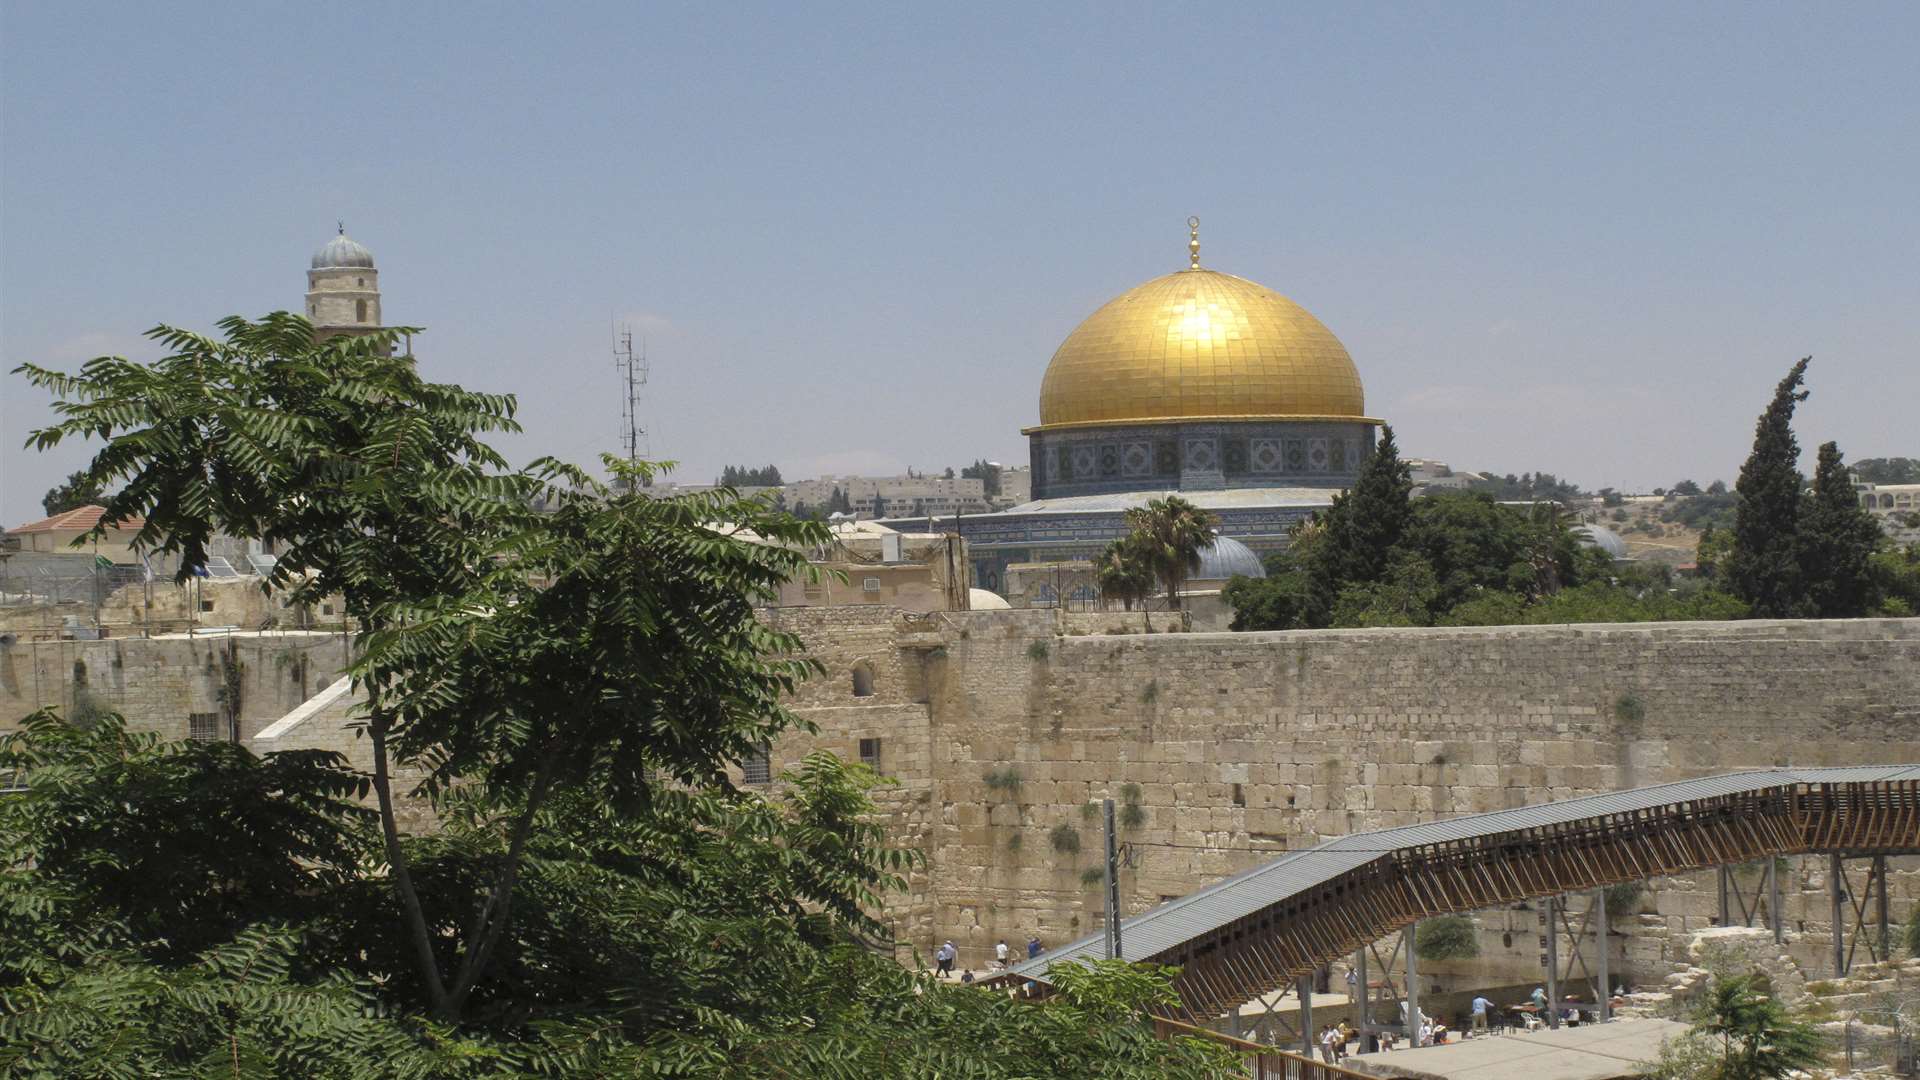 The golden Dome of the Rock is the most striking building in the cityscape. Picture: Suz Elvey